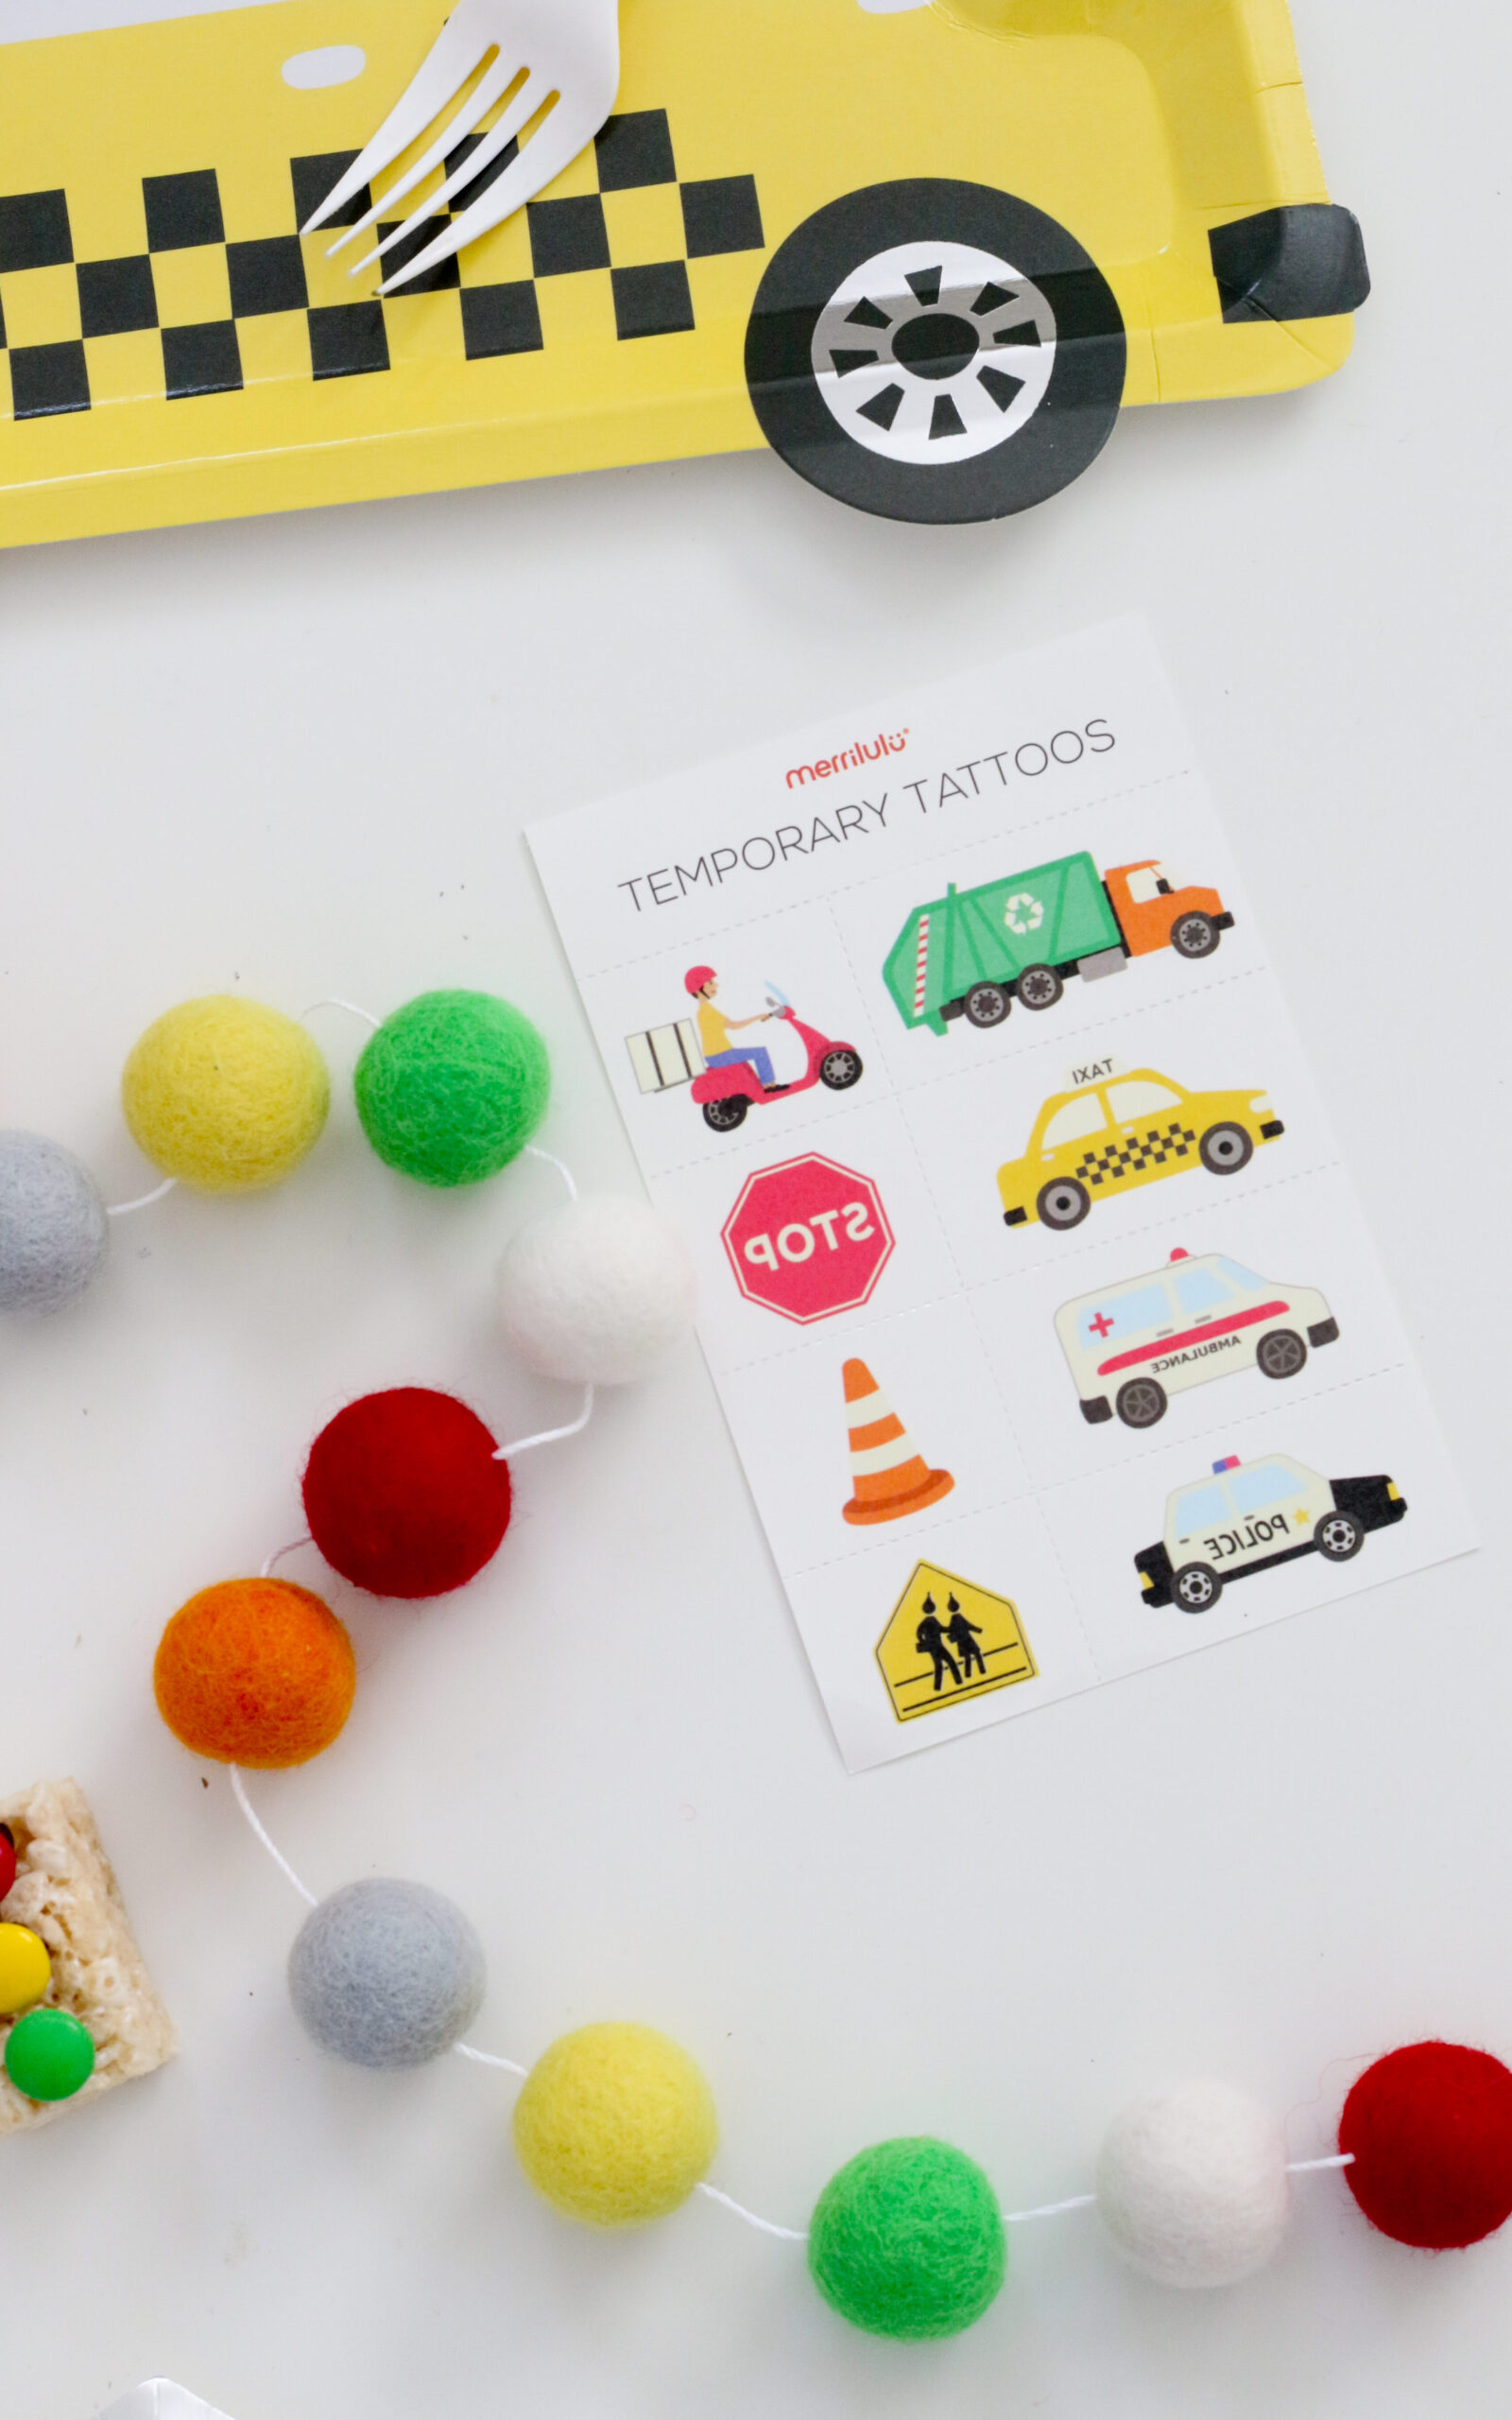 Vehicle Craft Kit for Kids, Transportation Birthday Party Activity